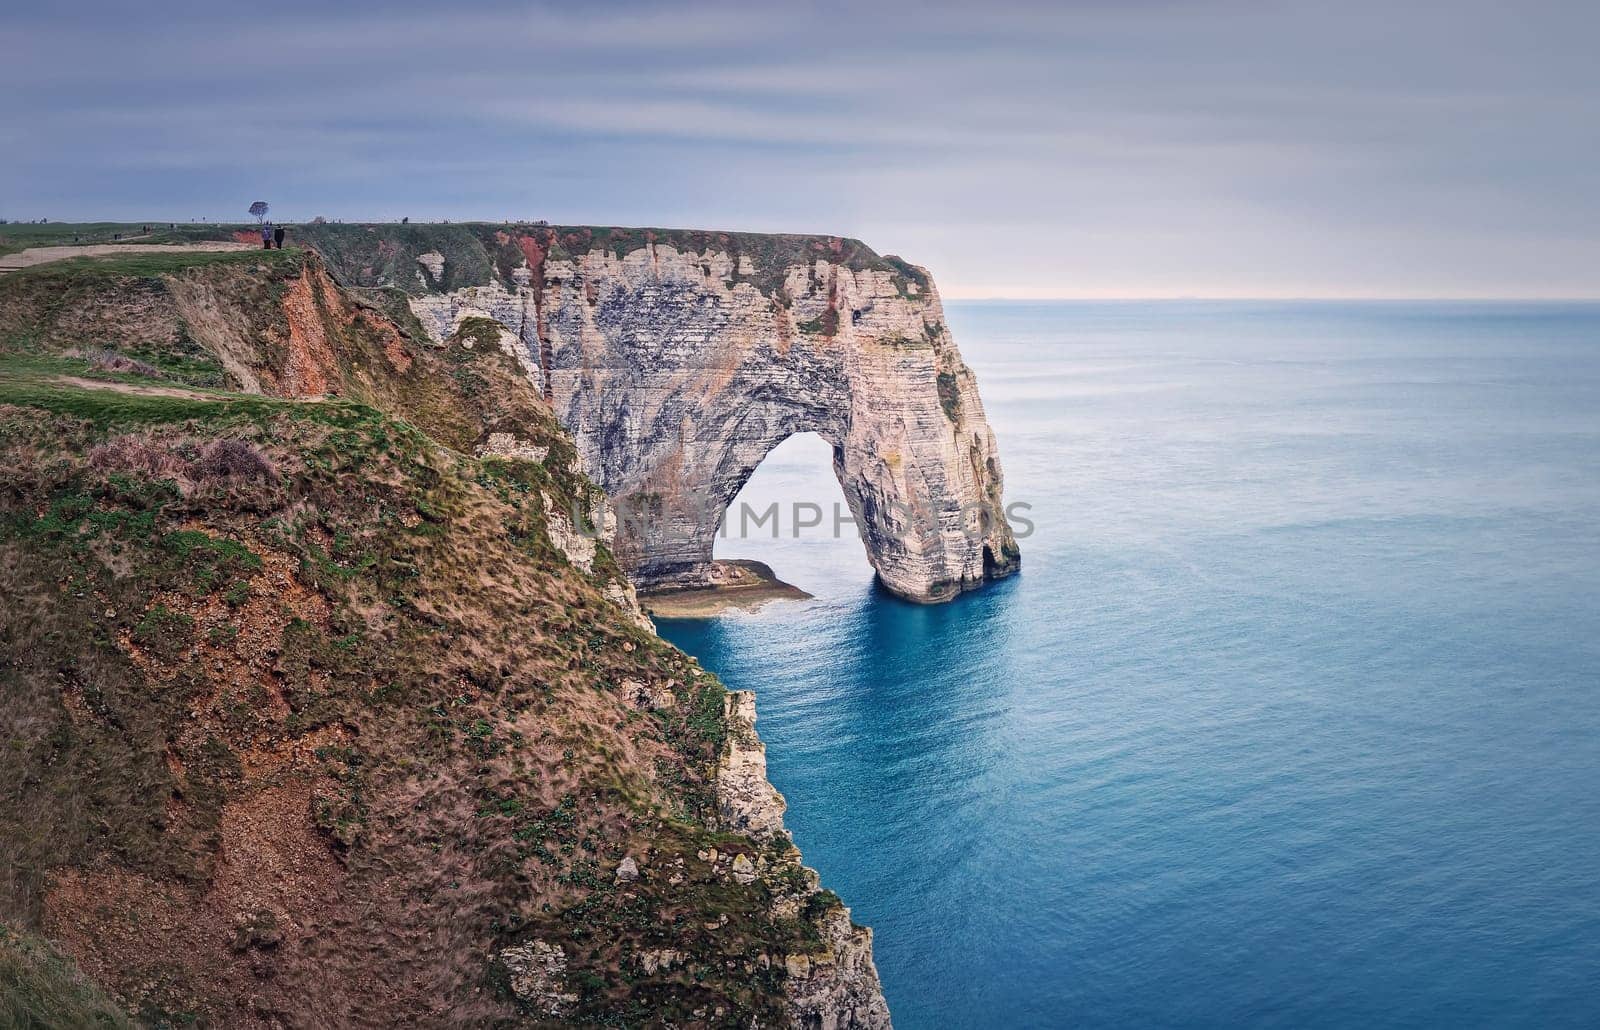 Sightseeing view to the Porte d'Aval natural arch cliff washed by Atlantic ocean waters at Etretat, Normandy, France. Beautiful coastline scenery with famous Falaise d'Aval by psychoshadow